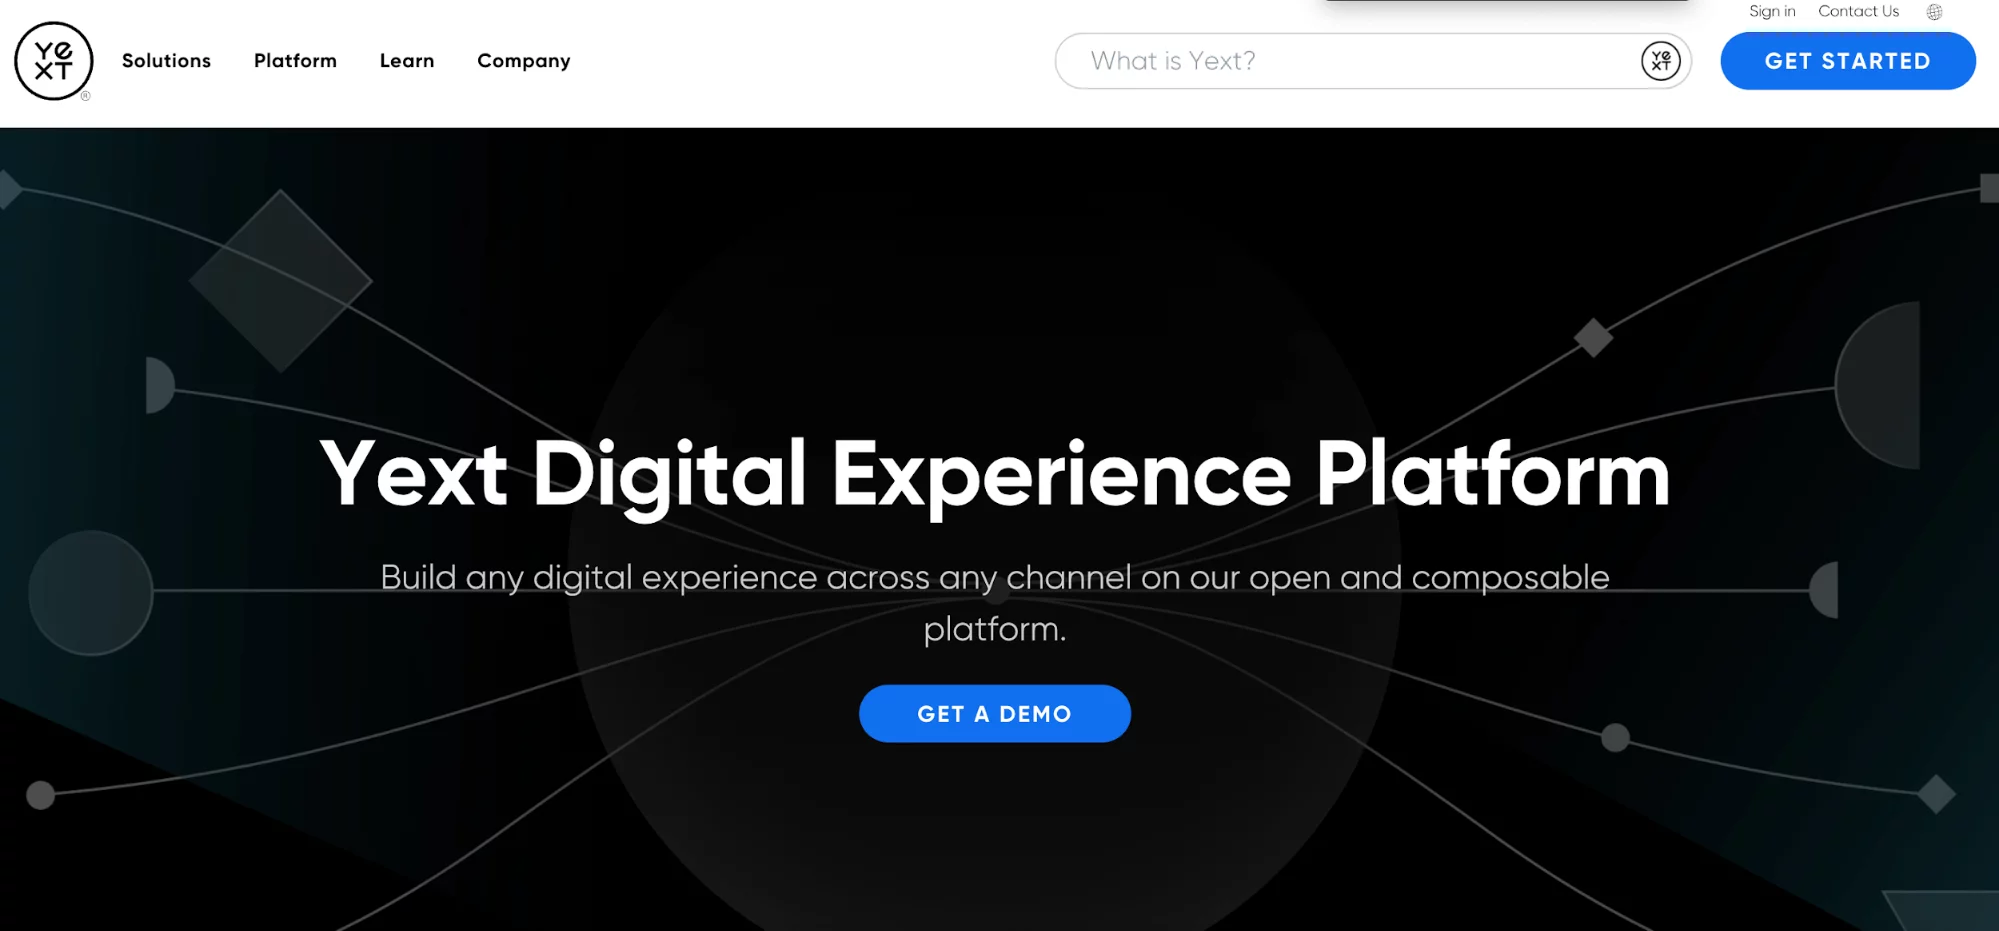 Yext simple homepage with a black background and the title Yext Digital Experience Platform